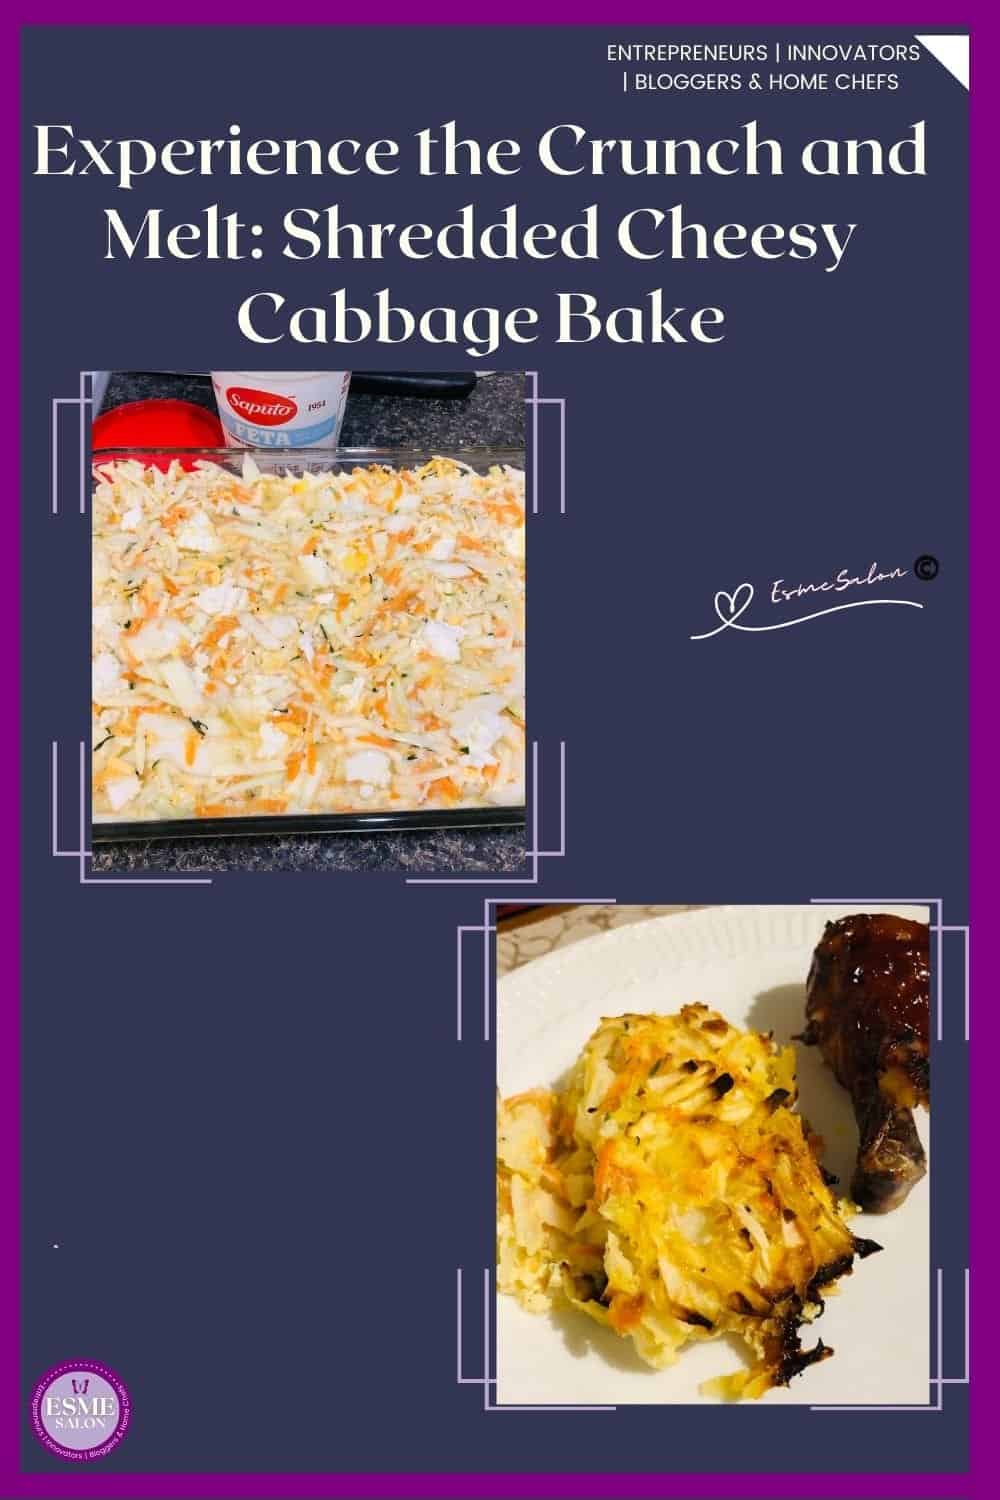 an image of a Shredded Cheesy Cabbage Vegetable Bake